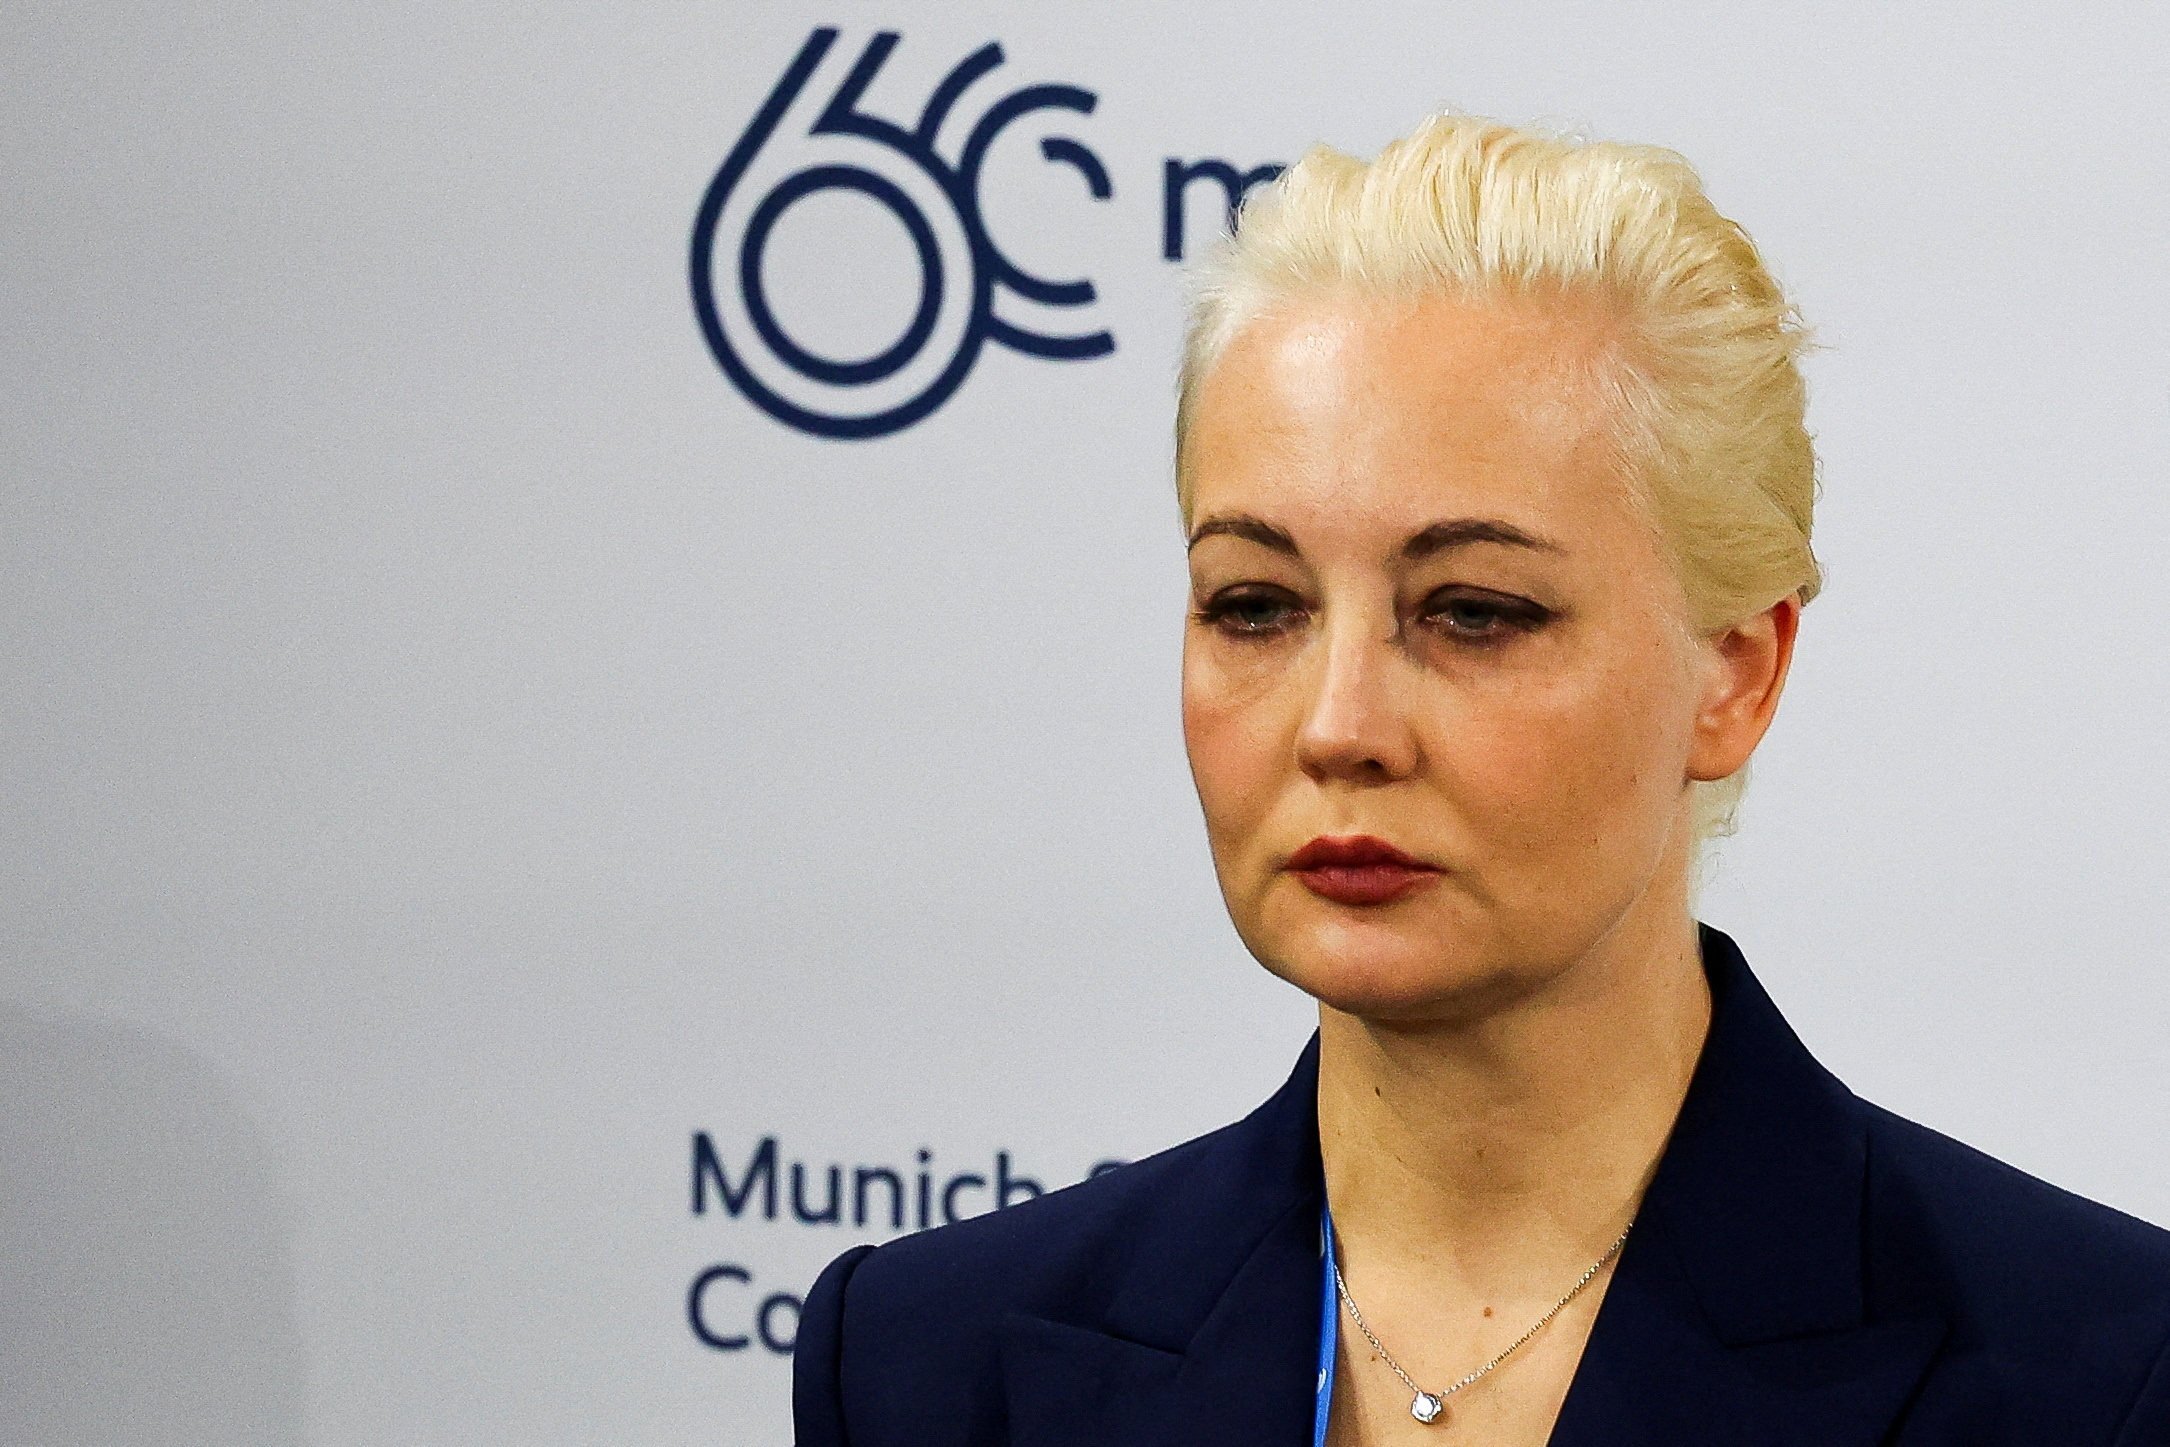 Yulia Navalnaya, wife of Alexei Navalny, at the Munich Security Conference in Germany on Friday, the day Navalny’s death was announced. Photo: AFP
